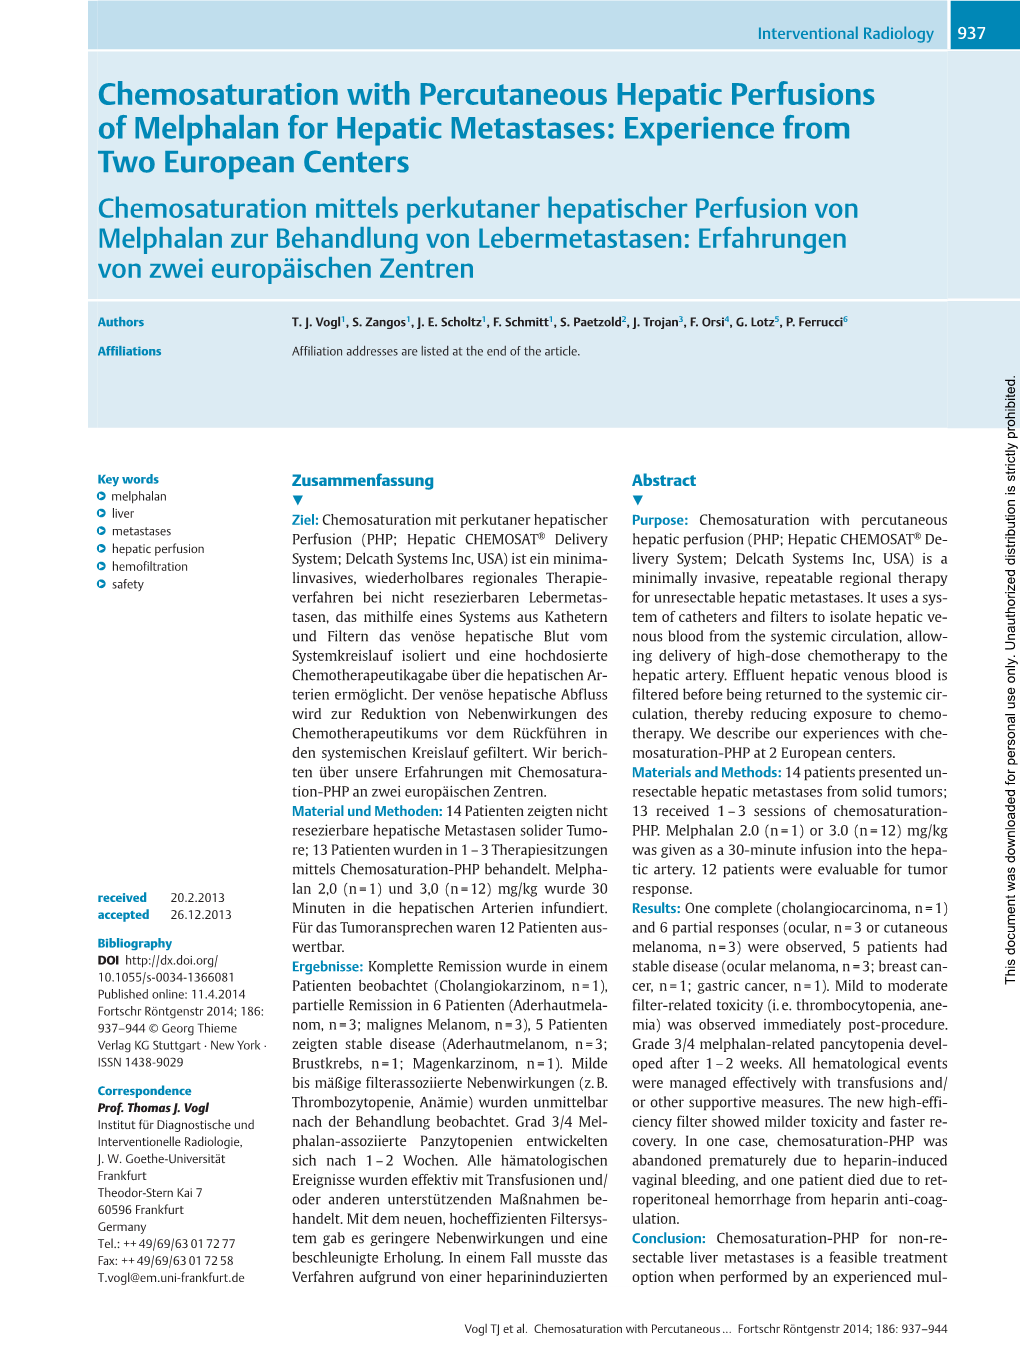 Chemosaturation with Percutaneous Hepatic Perfusions of Melphalan For